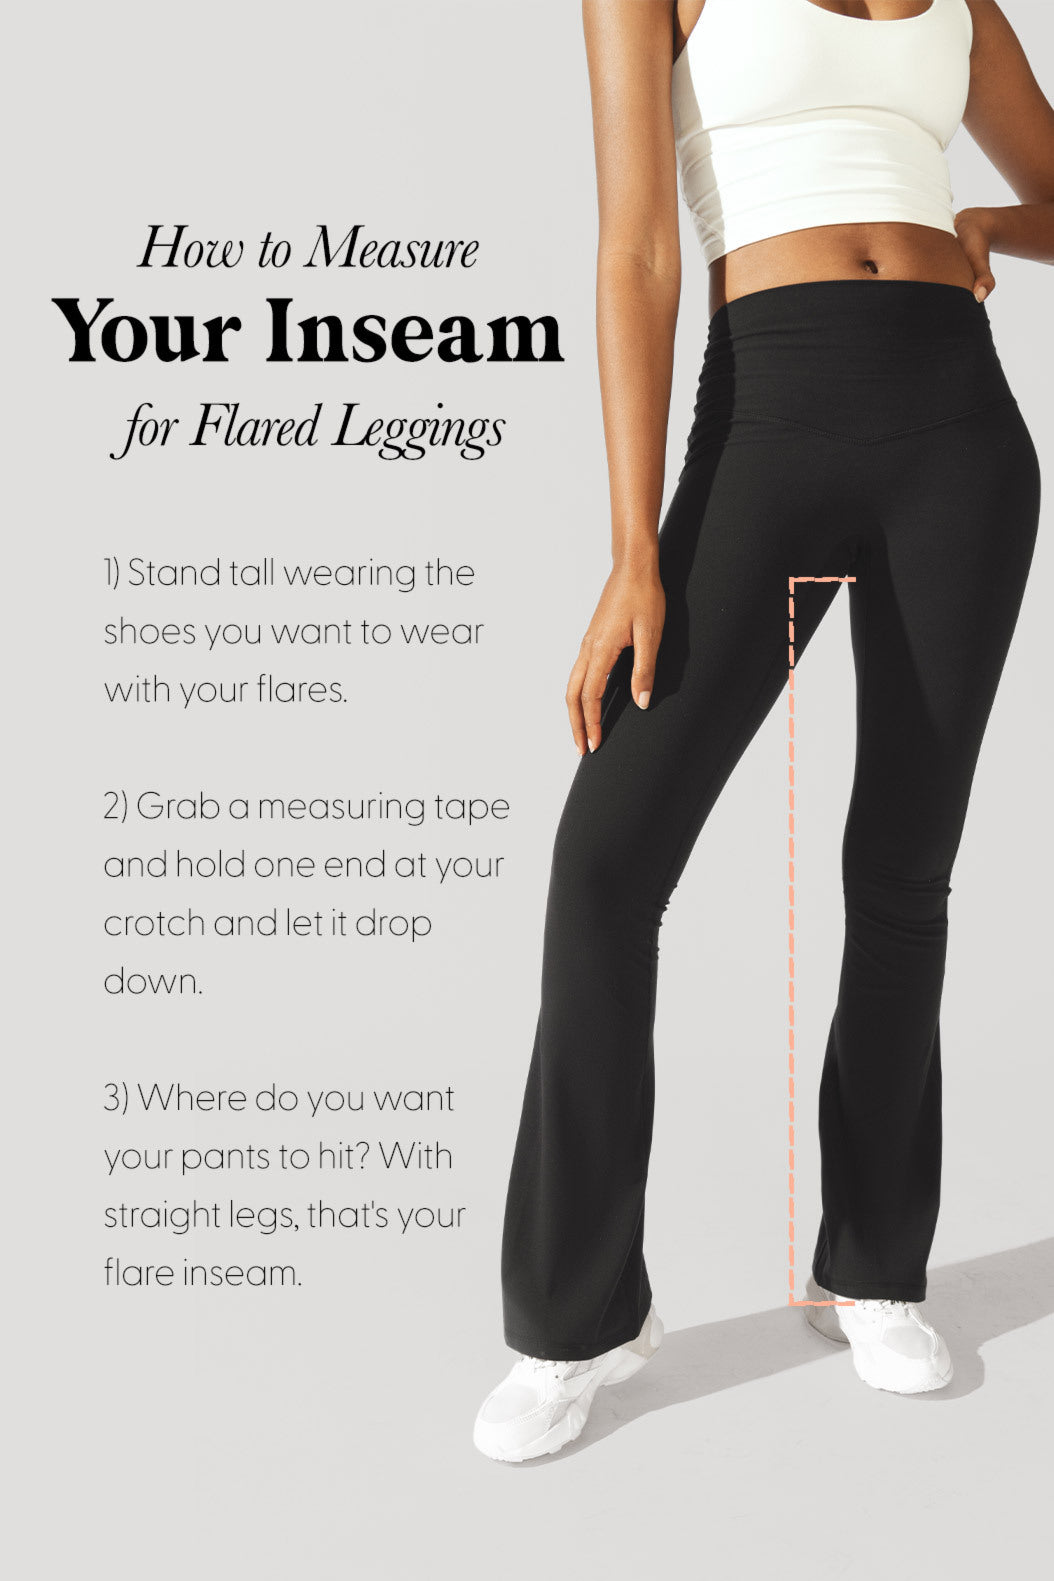 LL Womens Flare Yoga Pants With Soft Strap, Split Hem, And High Waist  Support For Indoor/Outdoor Fitness Slim Fit, Show Legs, Hip Lift, Solid  Color Leggings S5 From Dzclothes413, $12.11